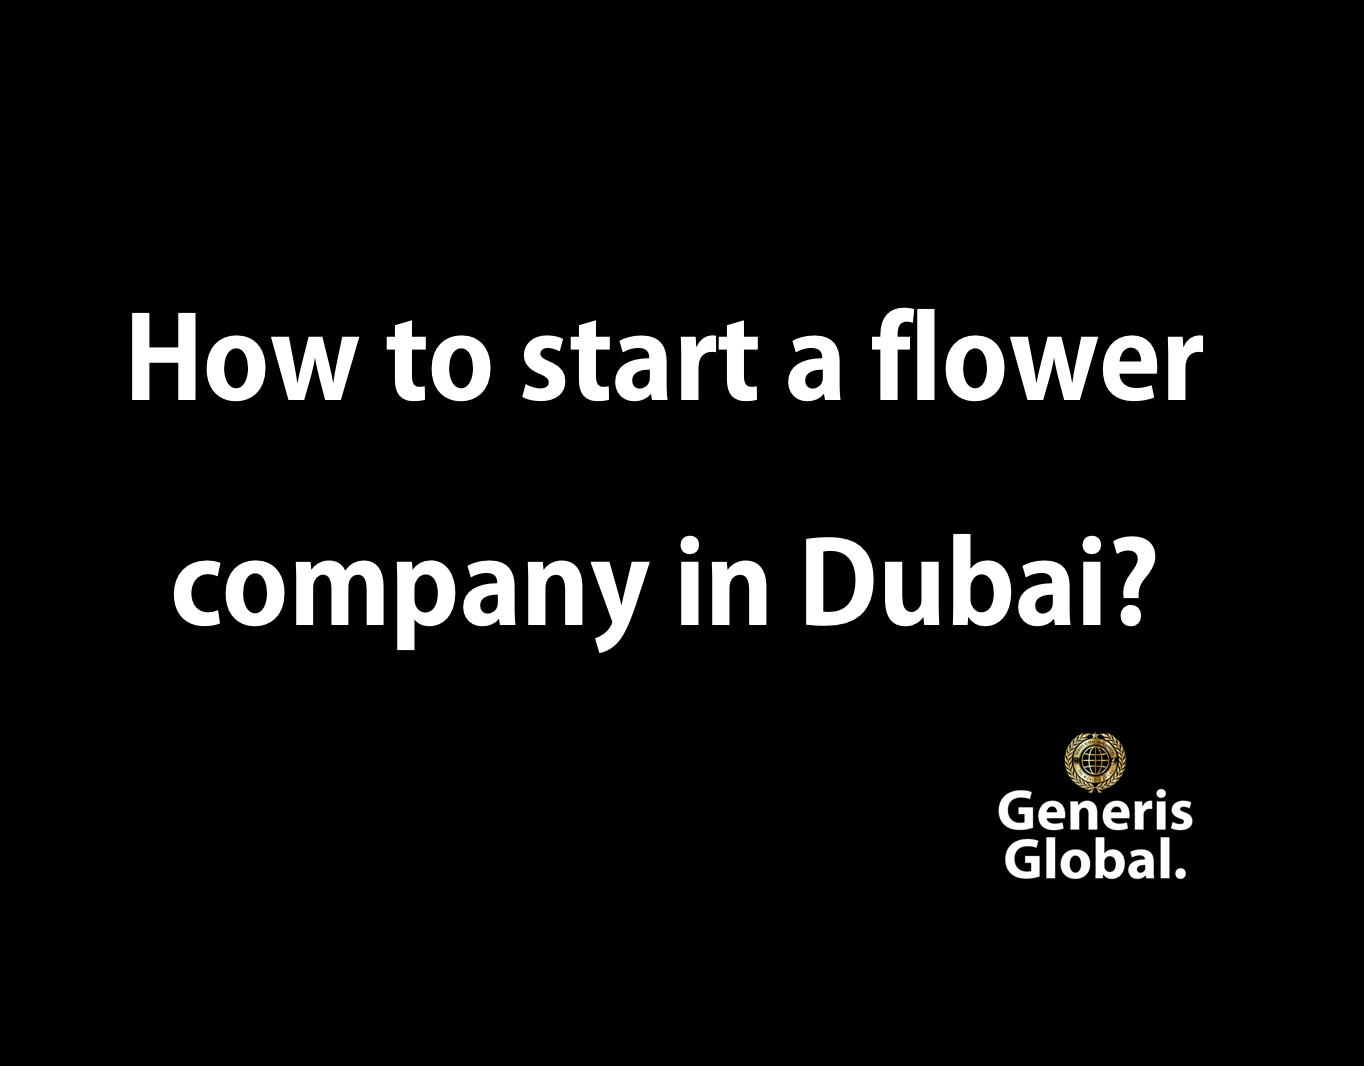 How to start a flower company in Dubai?